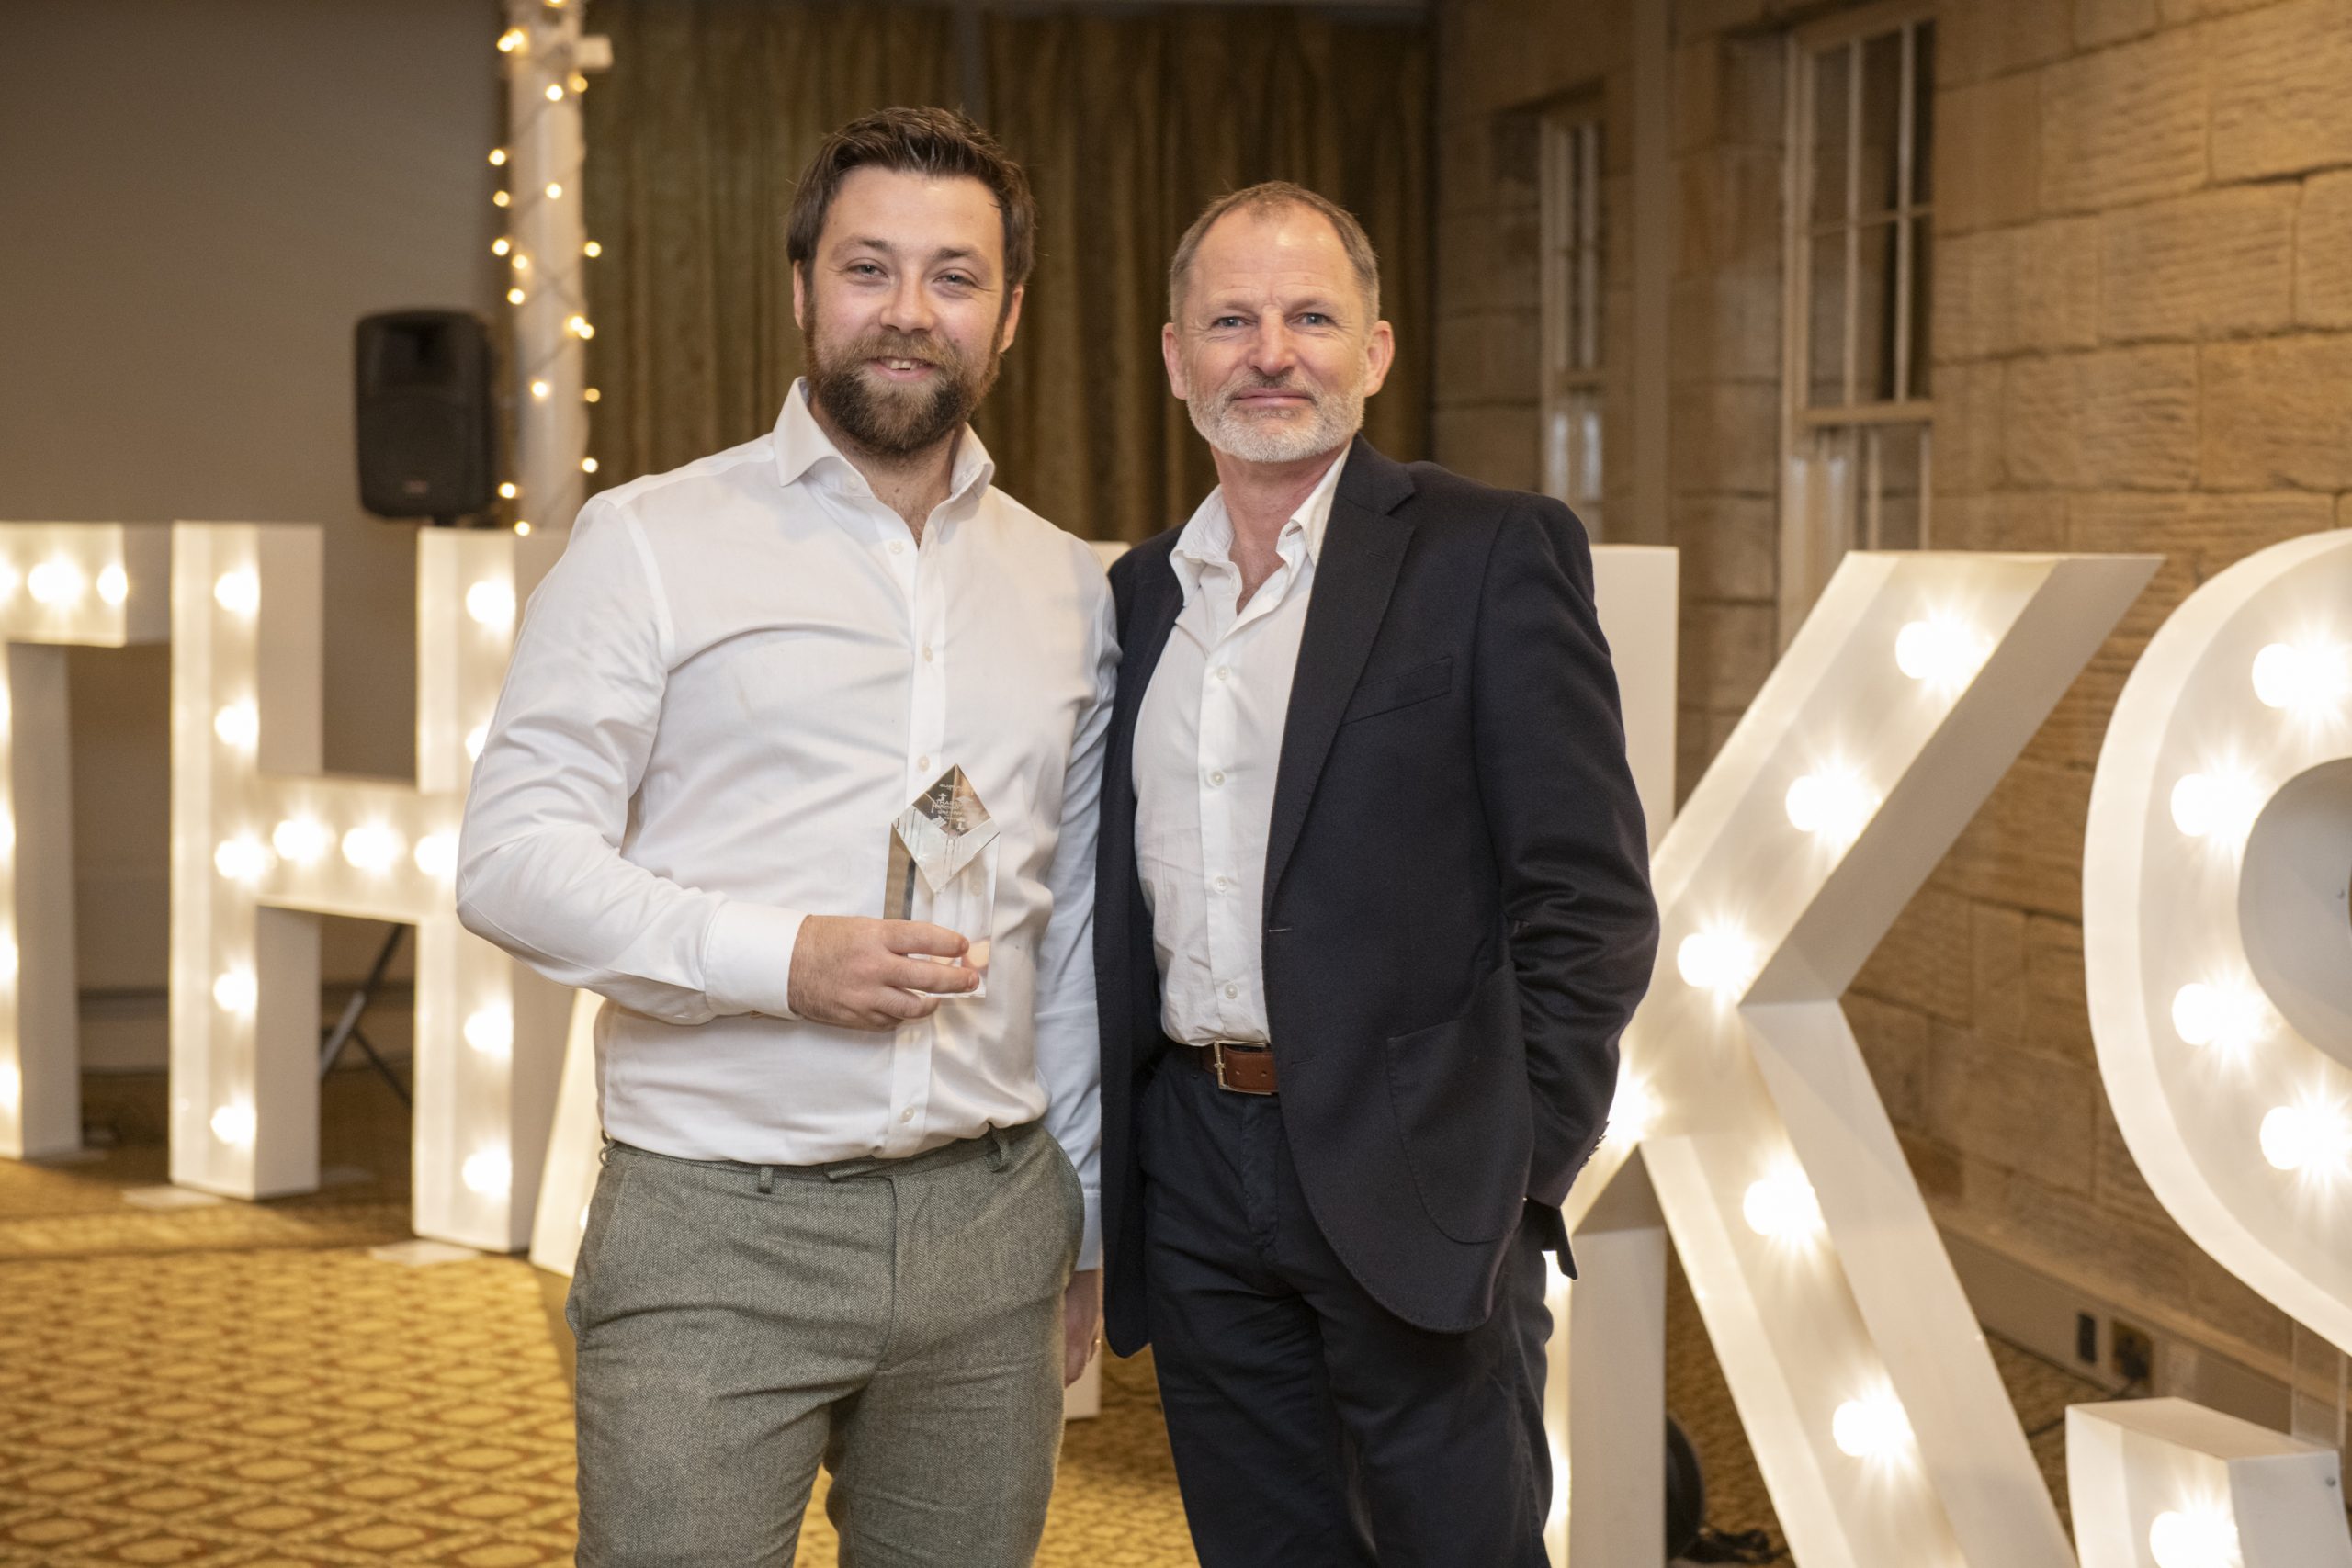 Ed Wilding, Lead Engineer at Tharsus accepting his Chairman's Award from Tharsus Founder, Brian Palmer